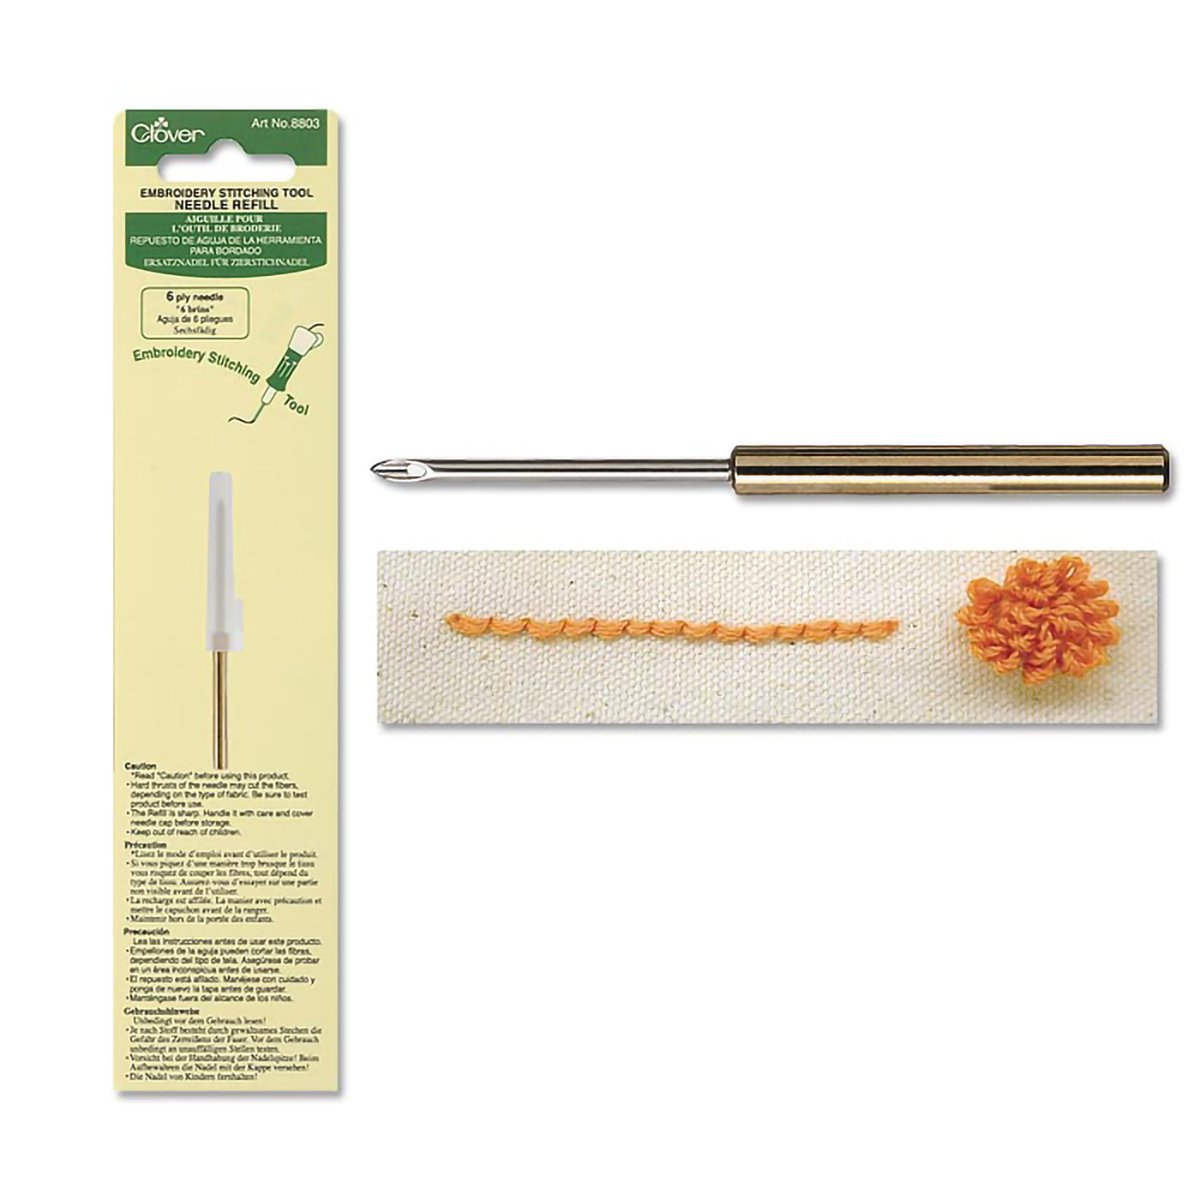 Clover Embroidery Stitching Tool Needle Refill 6 Ply